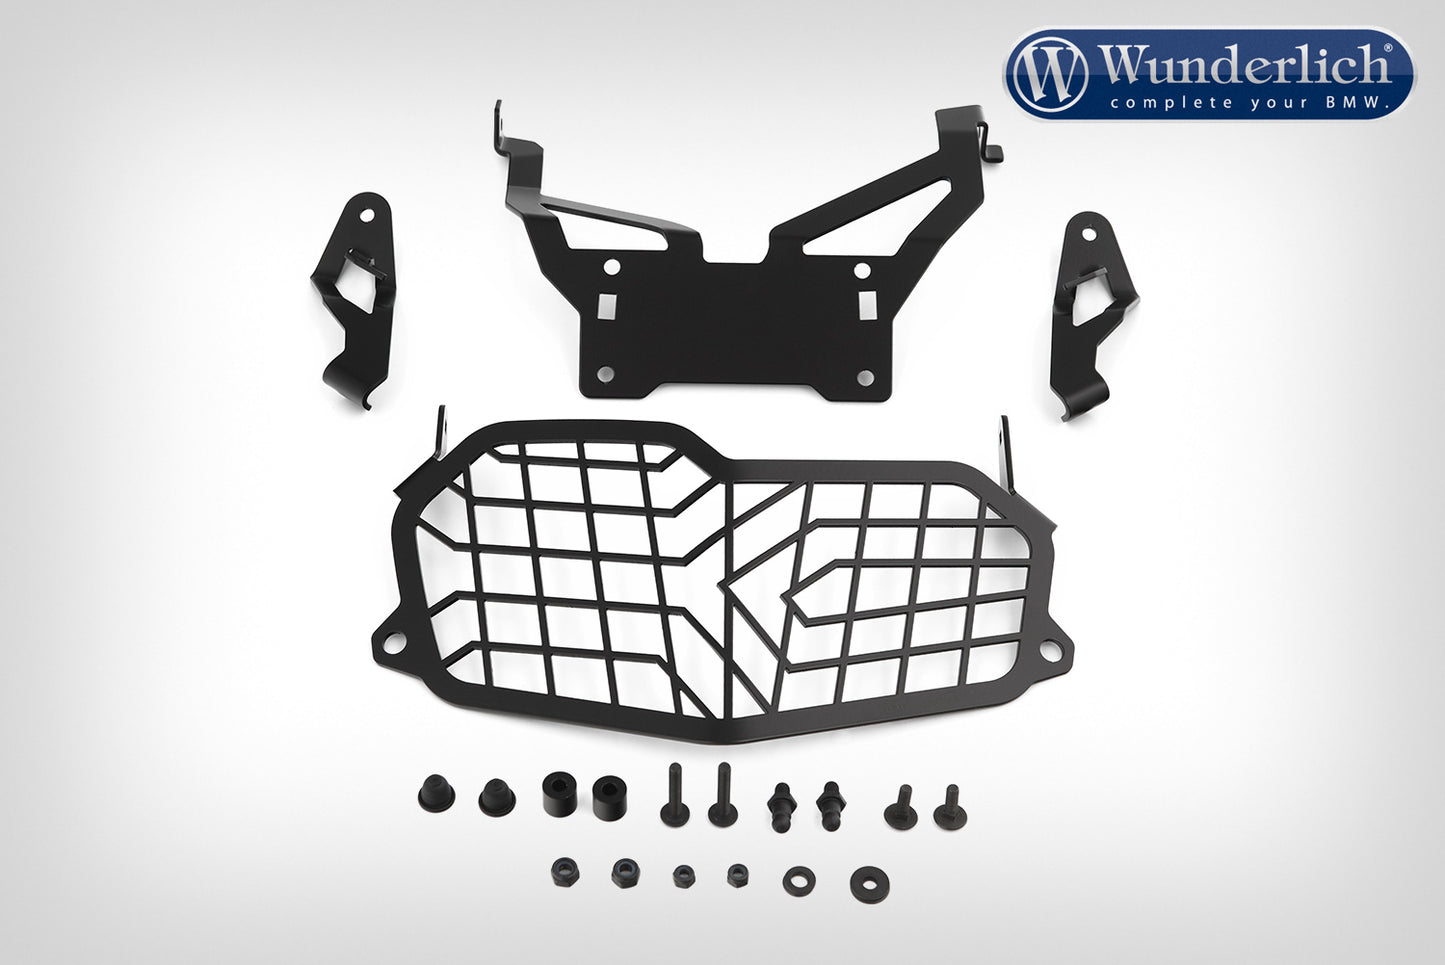 Wunderlich foldable headlight protection grille